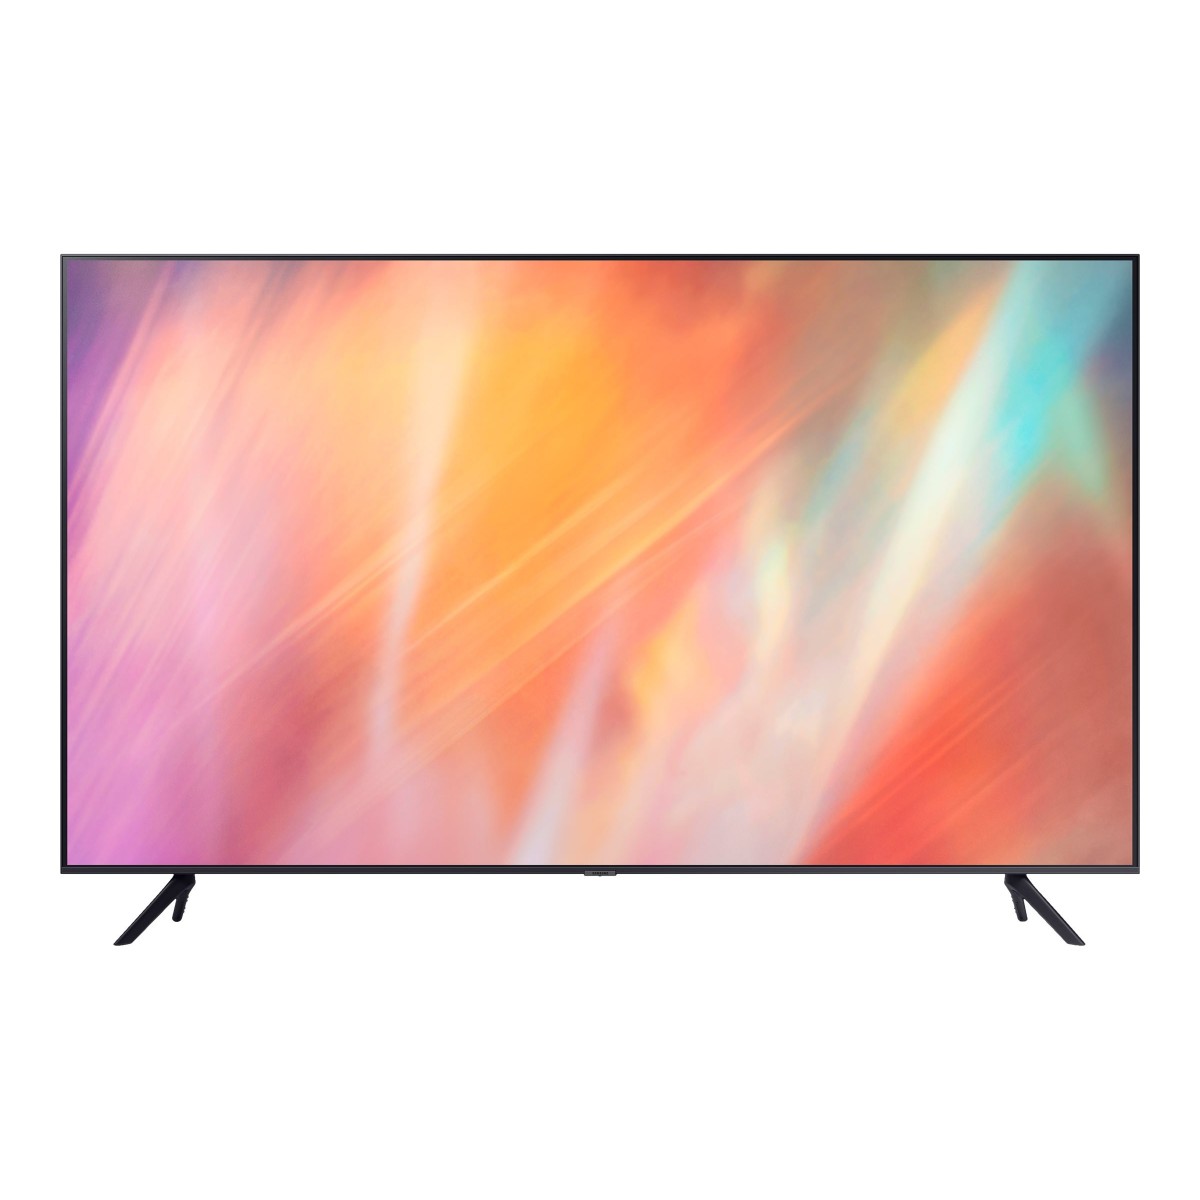 Samsung BE75A-H - 75" Diagonal Class BEA-H Series LED-backlit LCD TV